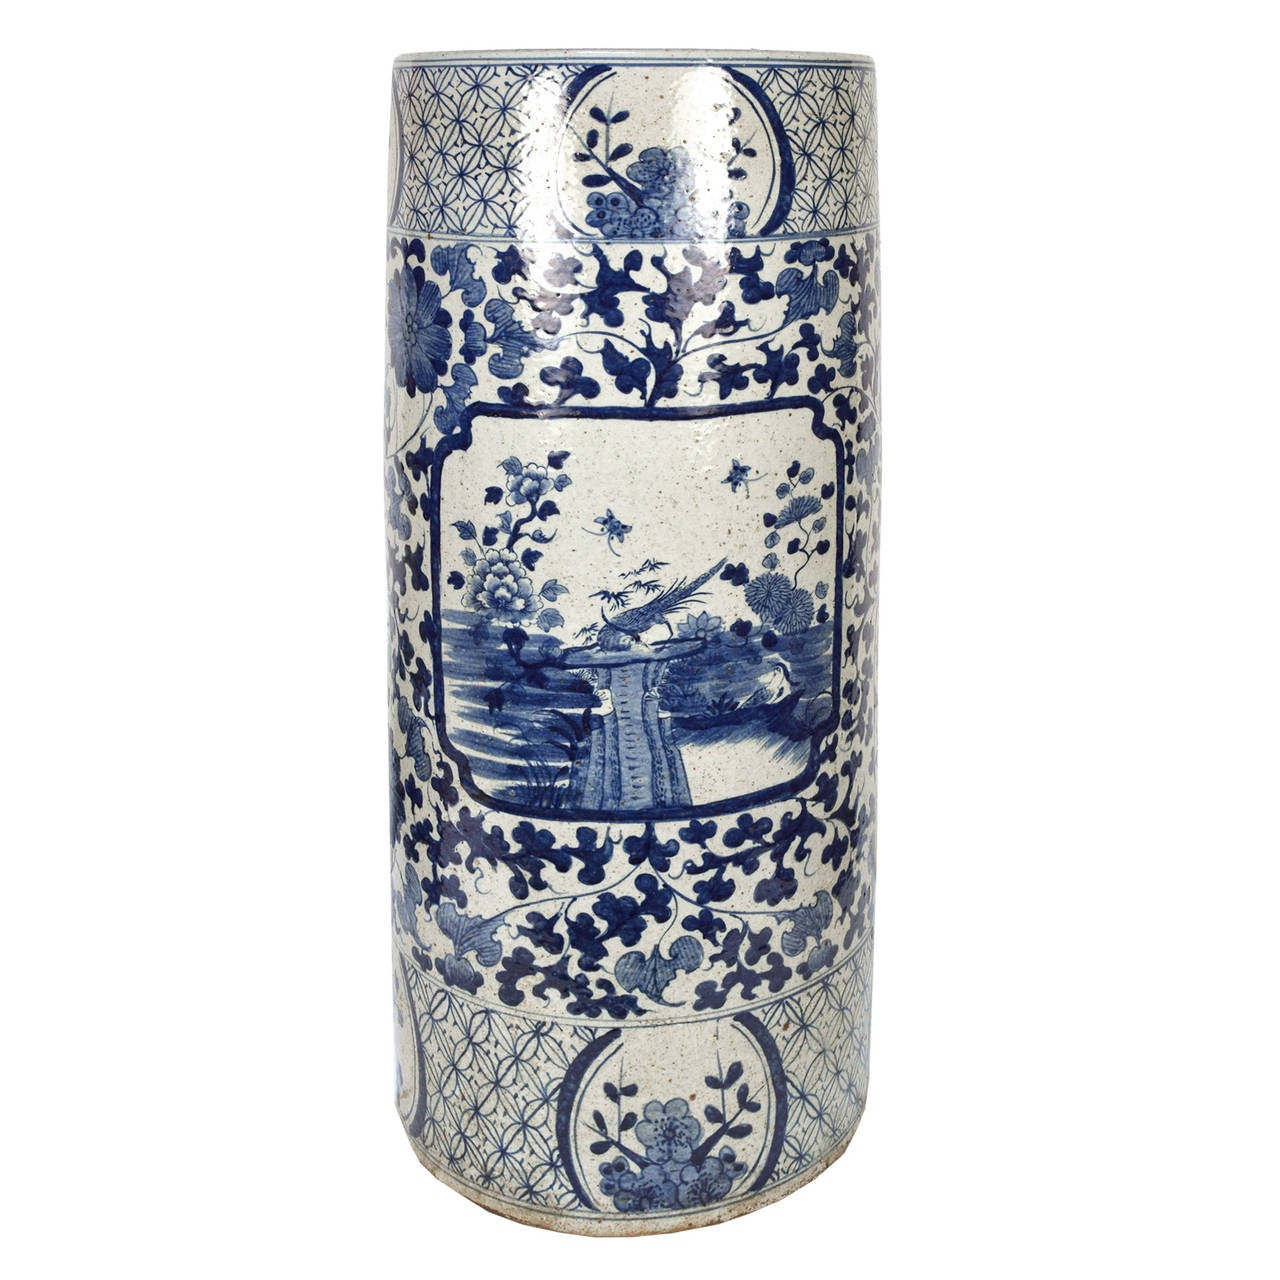 A pair of Chinese tall cylindrical blue and white ceramic containers painted painted with birds, flowers, and vines.